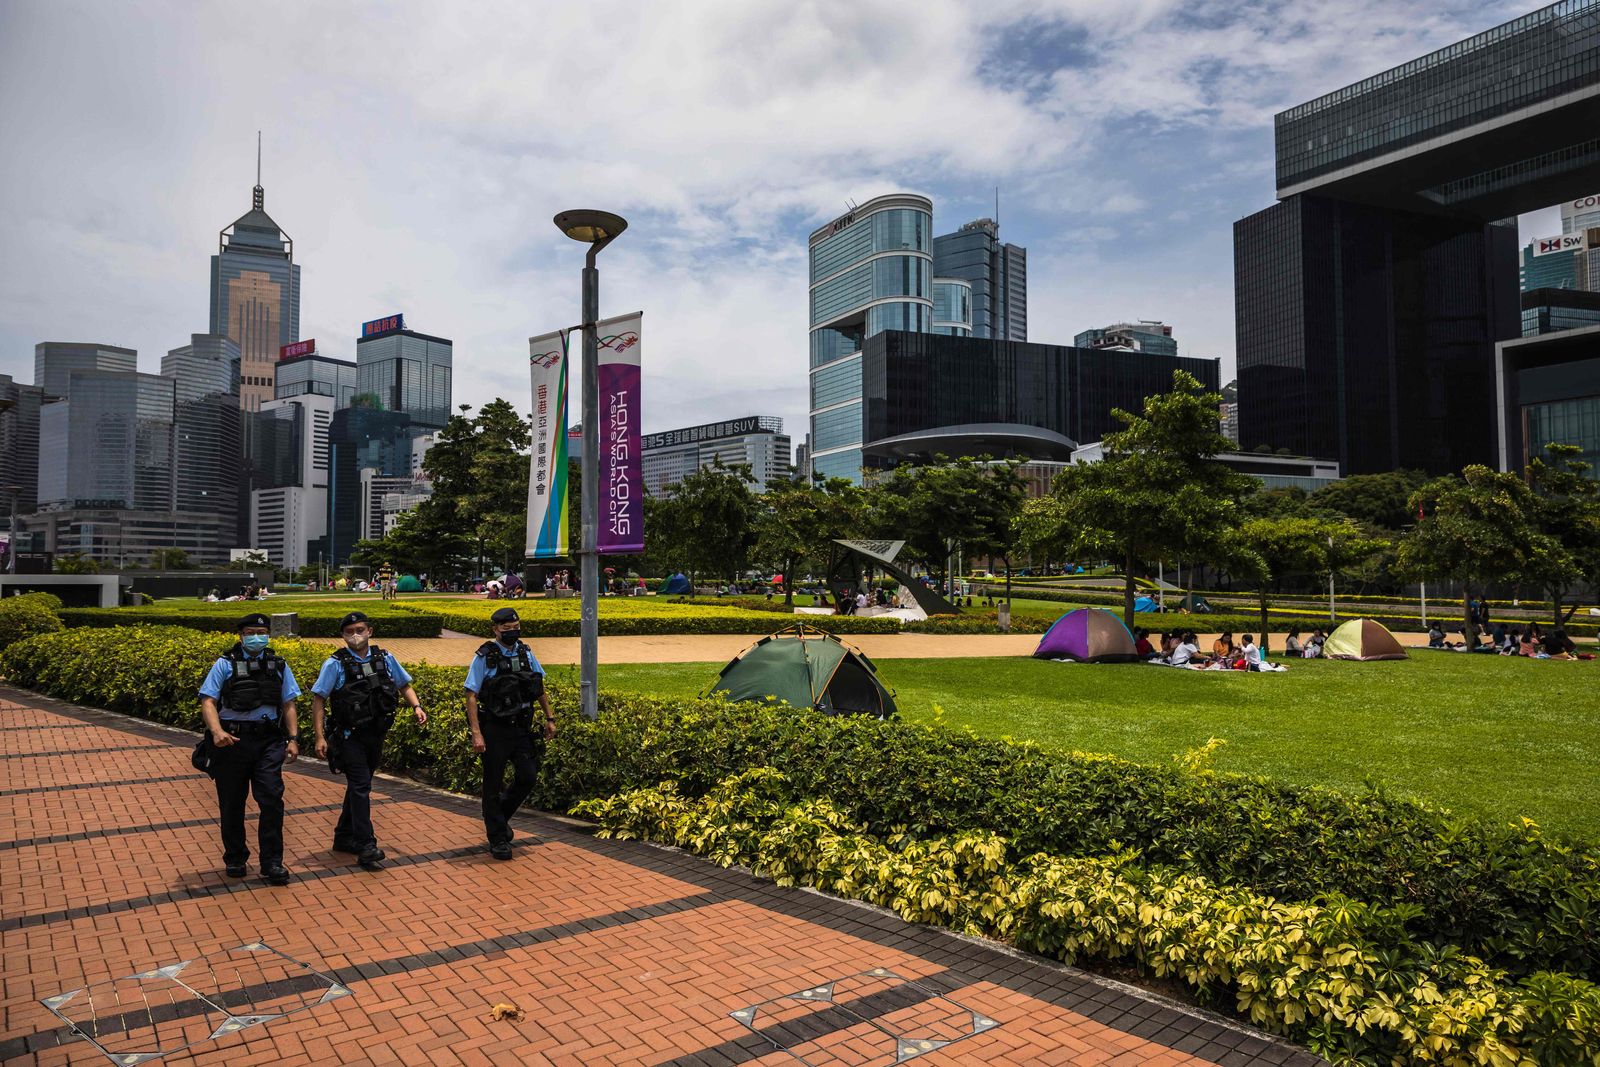 Police patrol near the government headquarters (R) in Hong Kong on May 8, 2022. - John Lee, a former security chief who oversaw the crackdown on Hong Kong's democracy movement, was anointed the business hub's new leader on May 8 by a small committee of Beijing loyalists. (Photo by DALE DE LA REY / AFP) - AFP